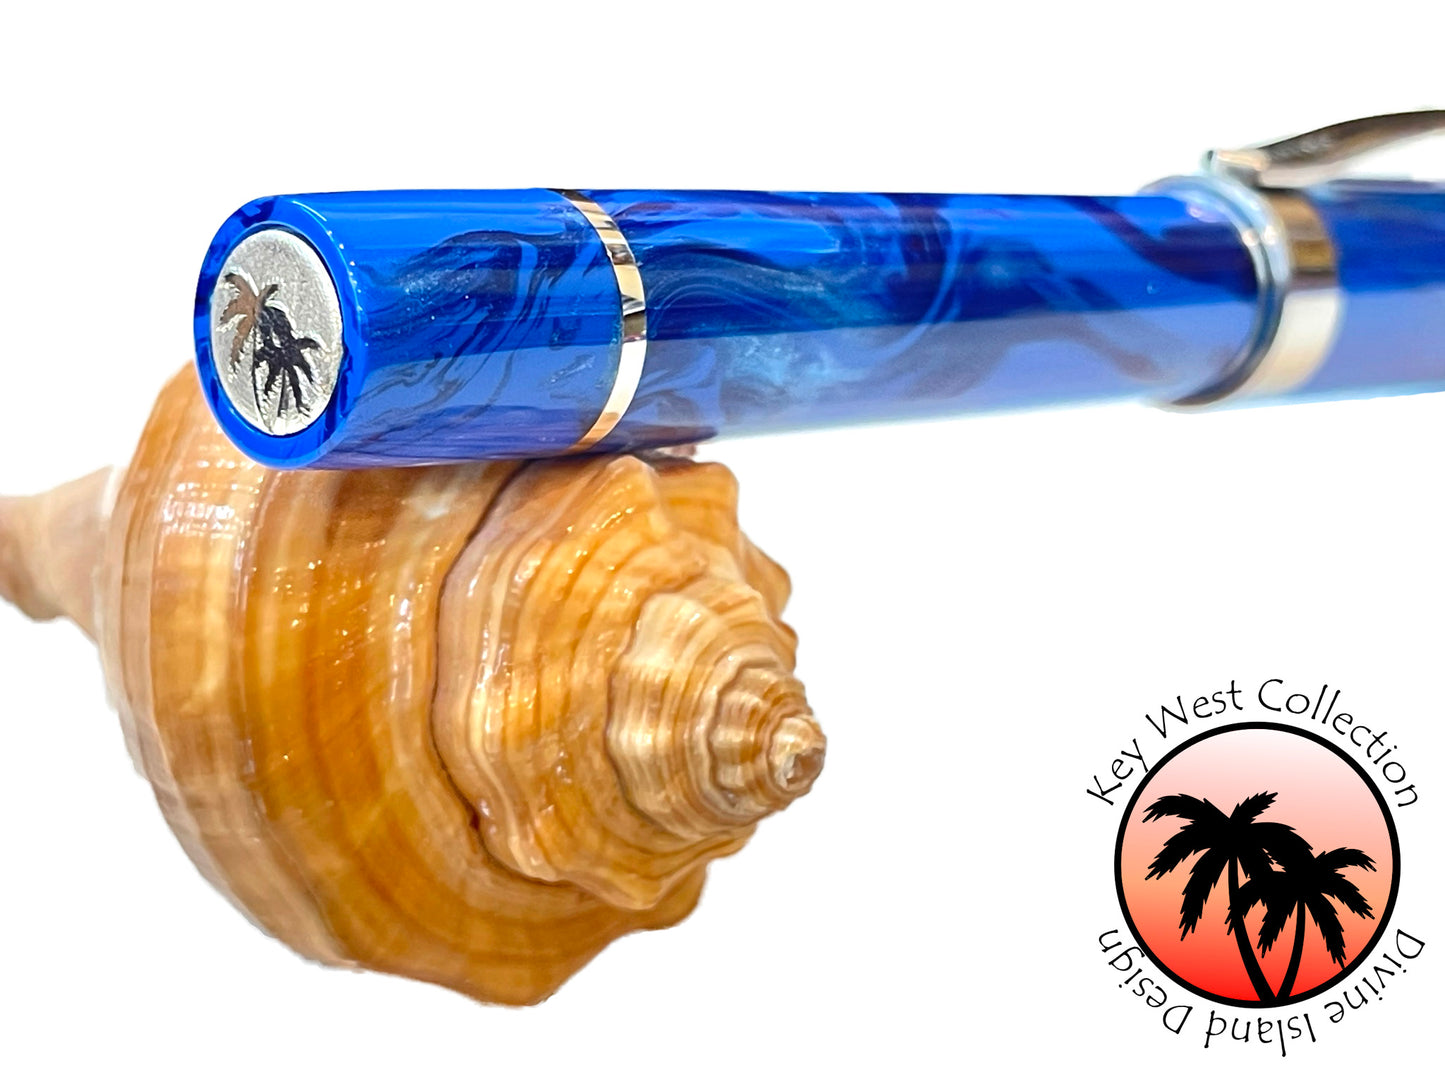 Key West Collection Fountain Pen - "Paradise"